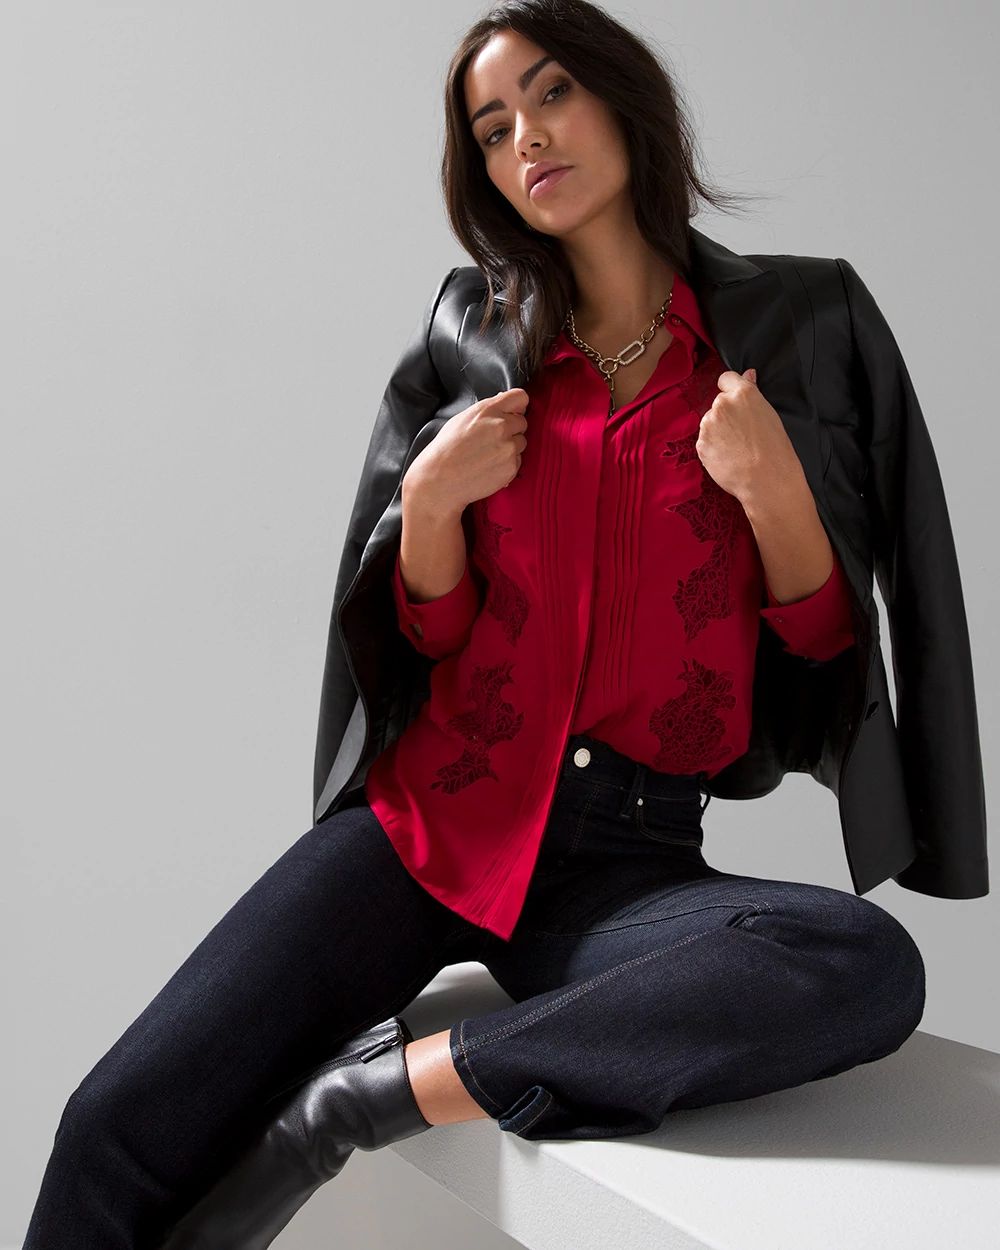 Long Sleeve Lace Applique Shirt click to view larger image.